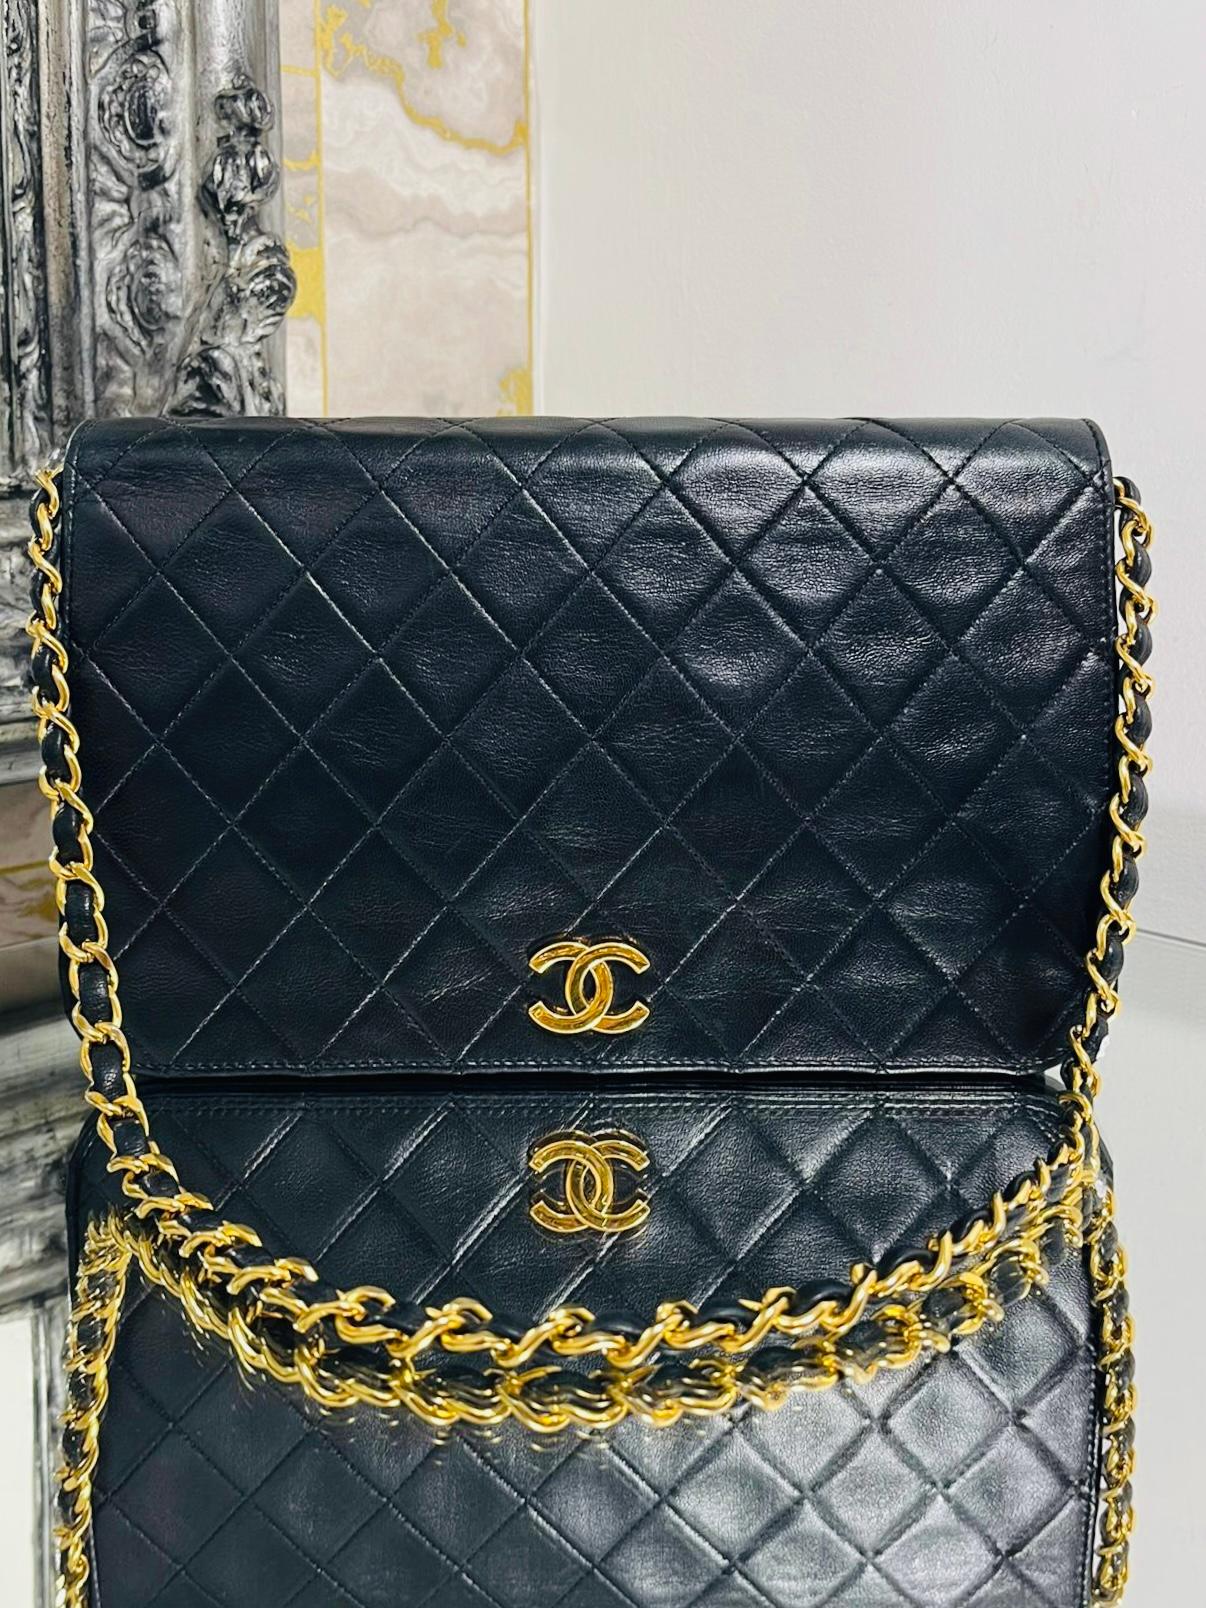 Chanel Vintage Timeless Single Flap Bag

Black diamond stich leather with 24k gold plated hardware.

'CC' logo and a single chain and leather shoulder strap. Burgundy

leather interior. From approx 1980's. No serial code due to age.

Size -